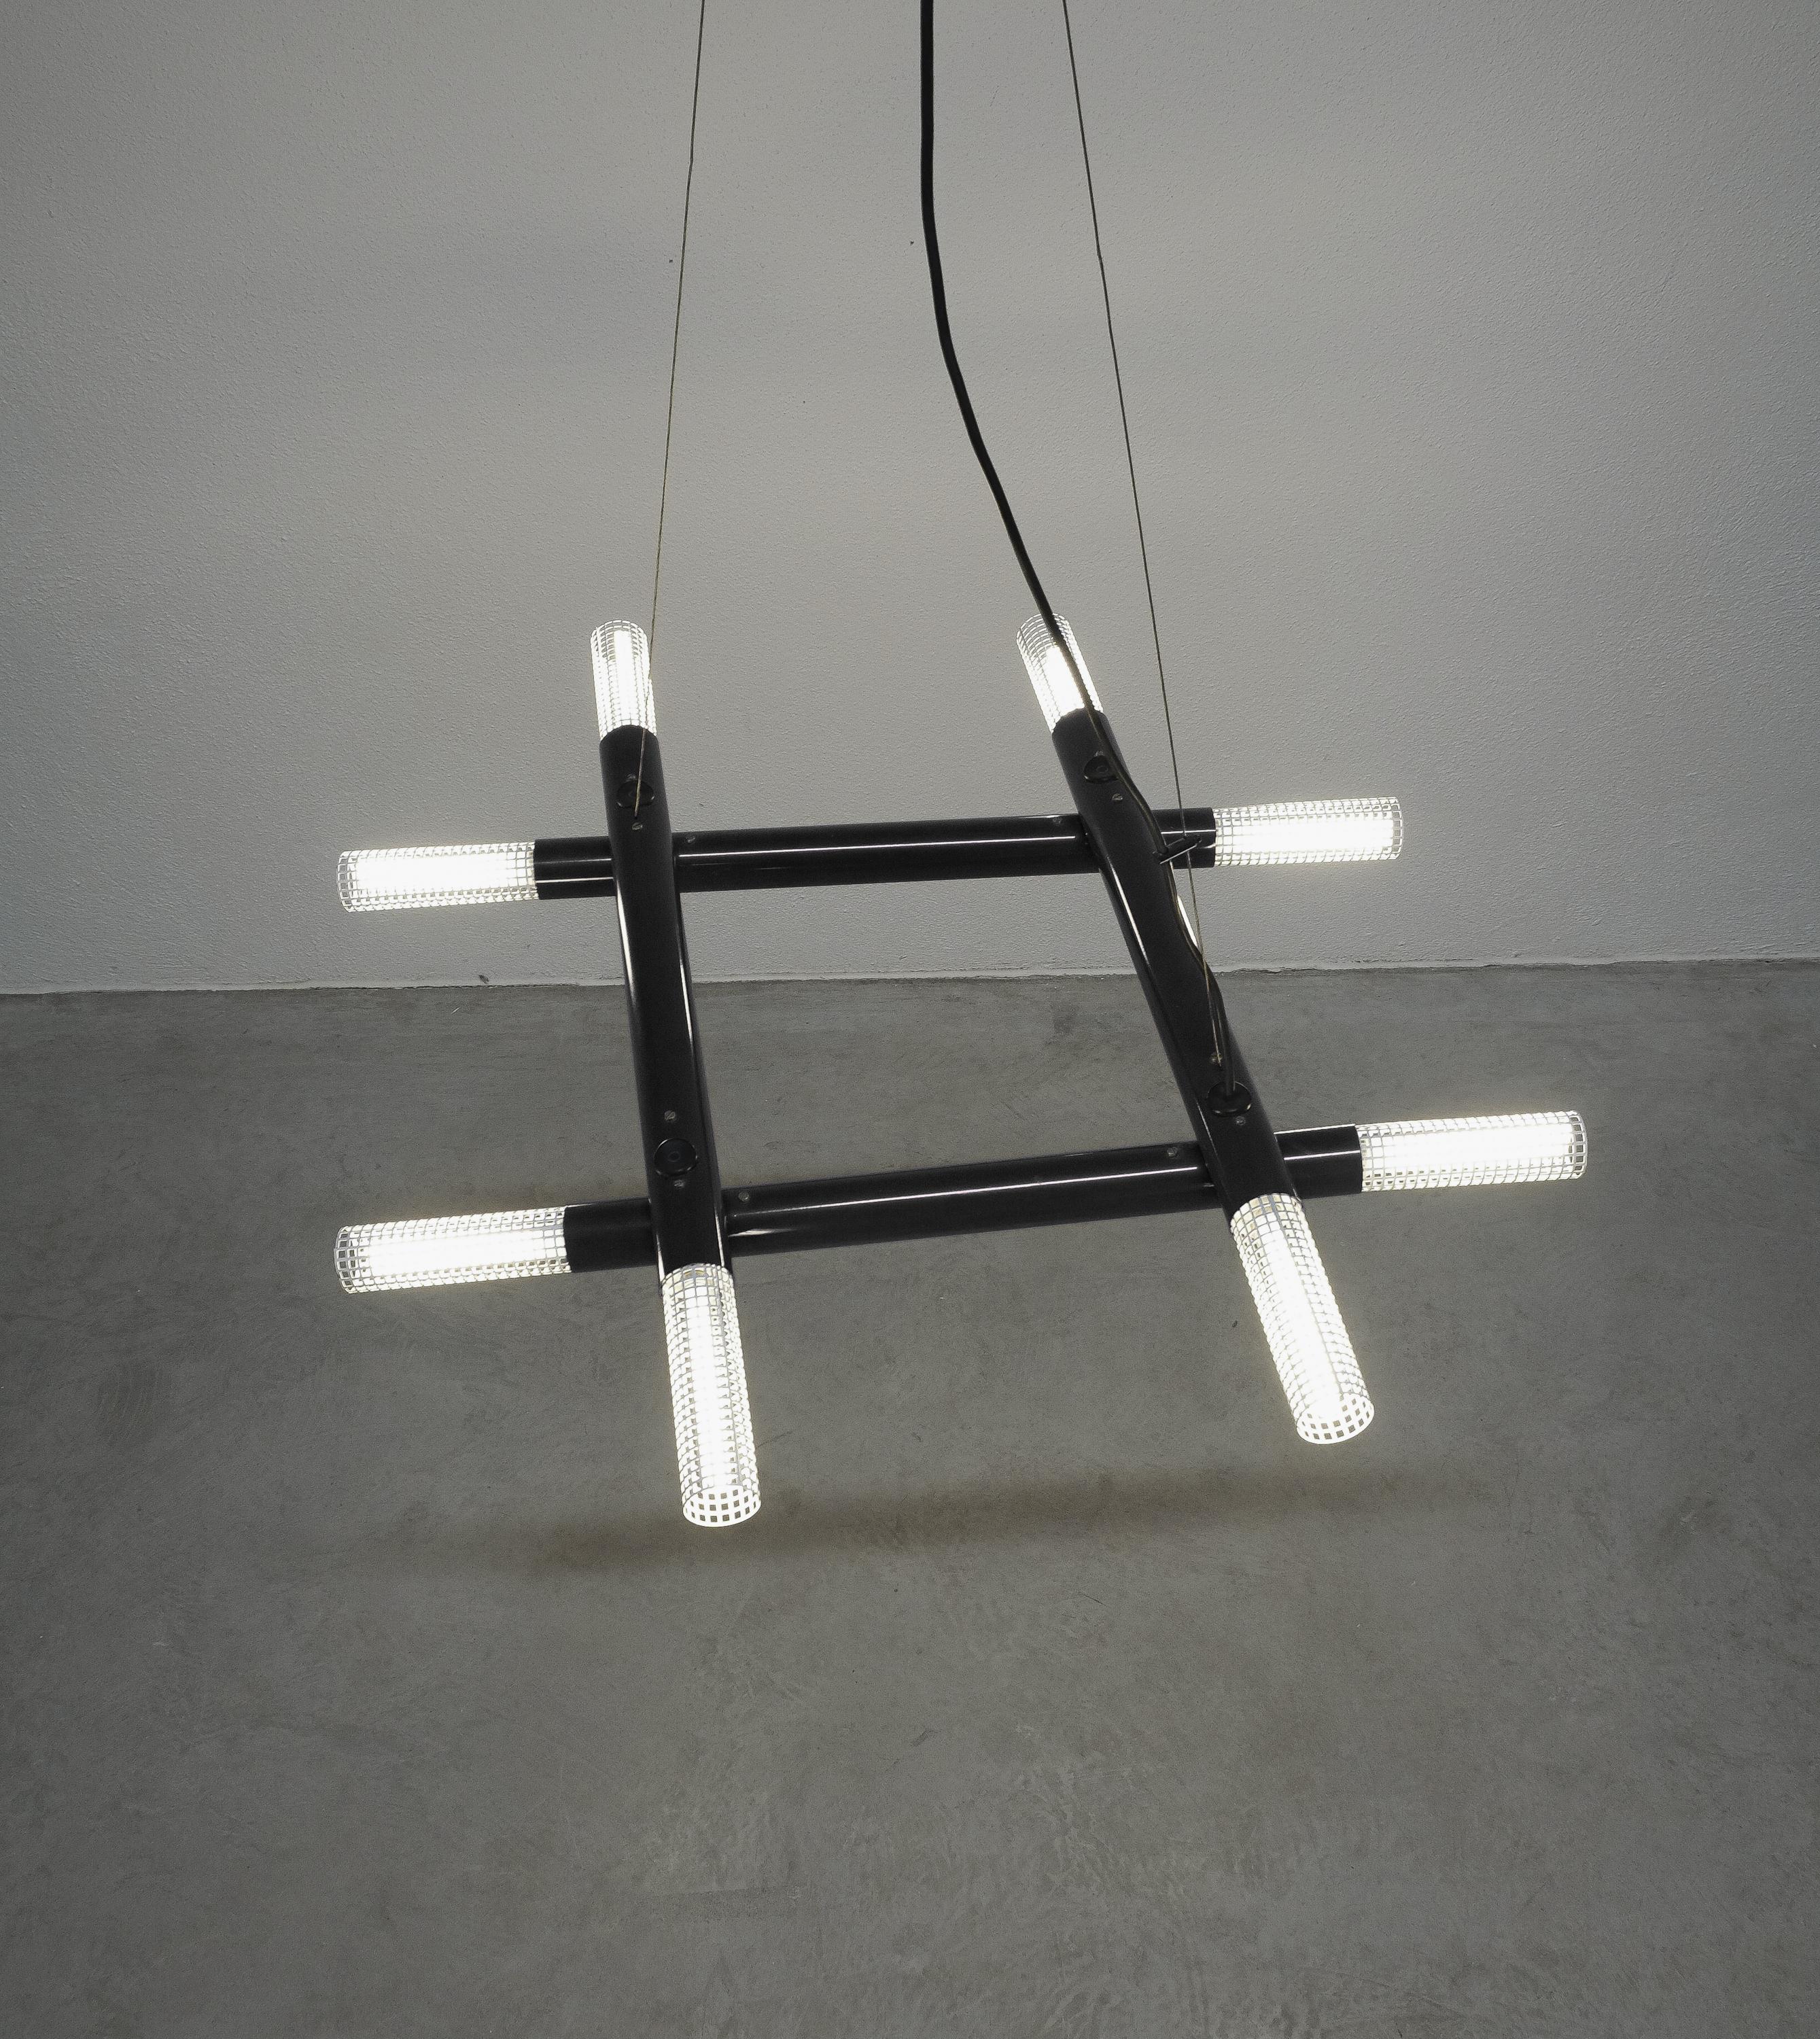 Postmodern black metal atomic chandelier, circa 1980

Cool architectural contemporary chandelier from the 1980s, Italy. It illuminates with 8 bulbs hidden behind white perforated metal diffusers. It can be adjusted pivoting the black tubes. The